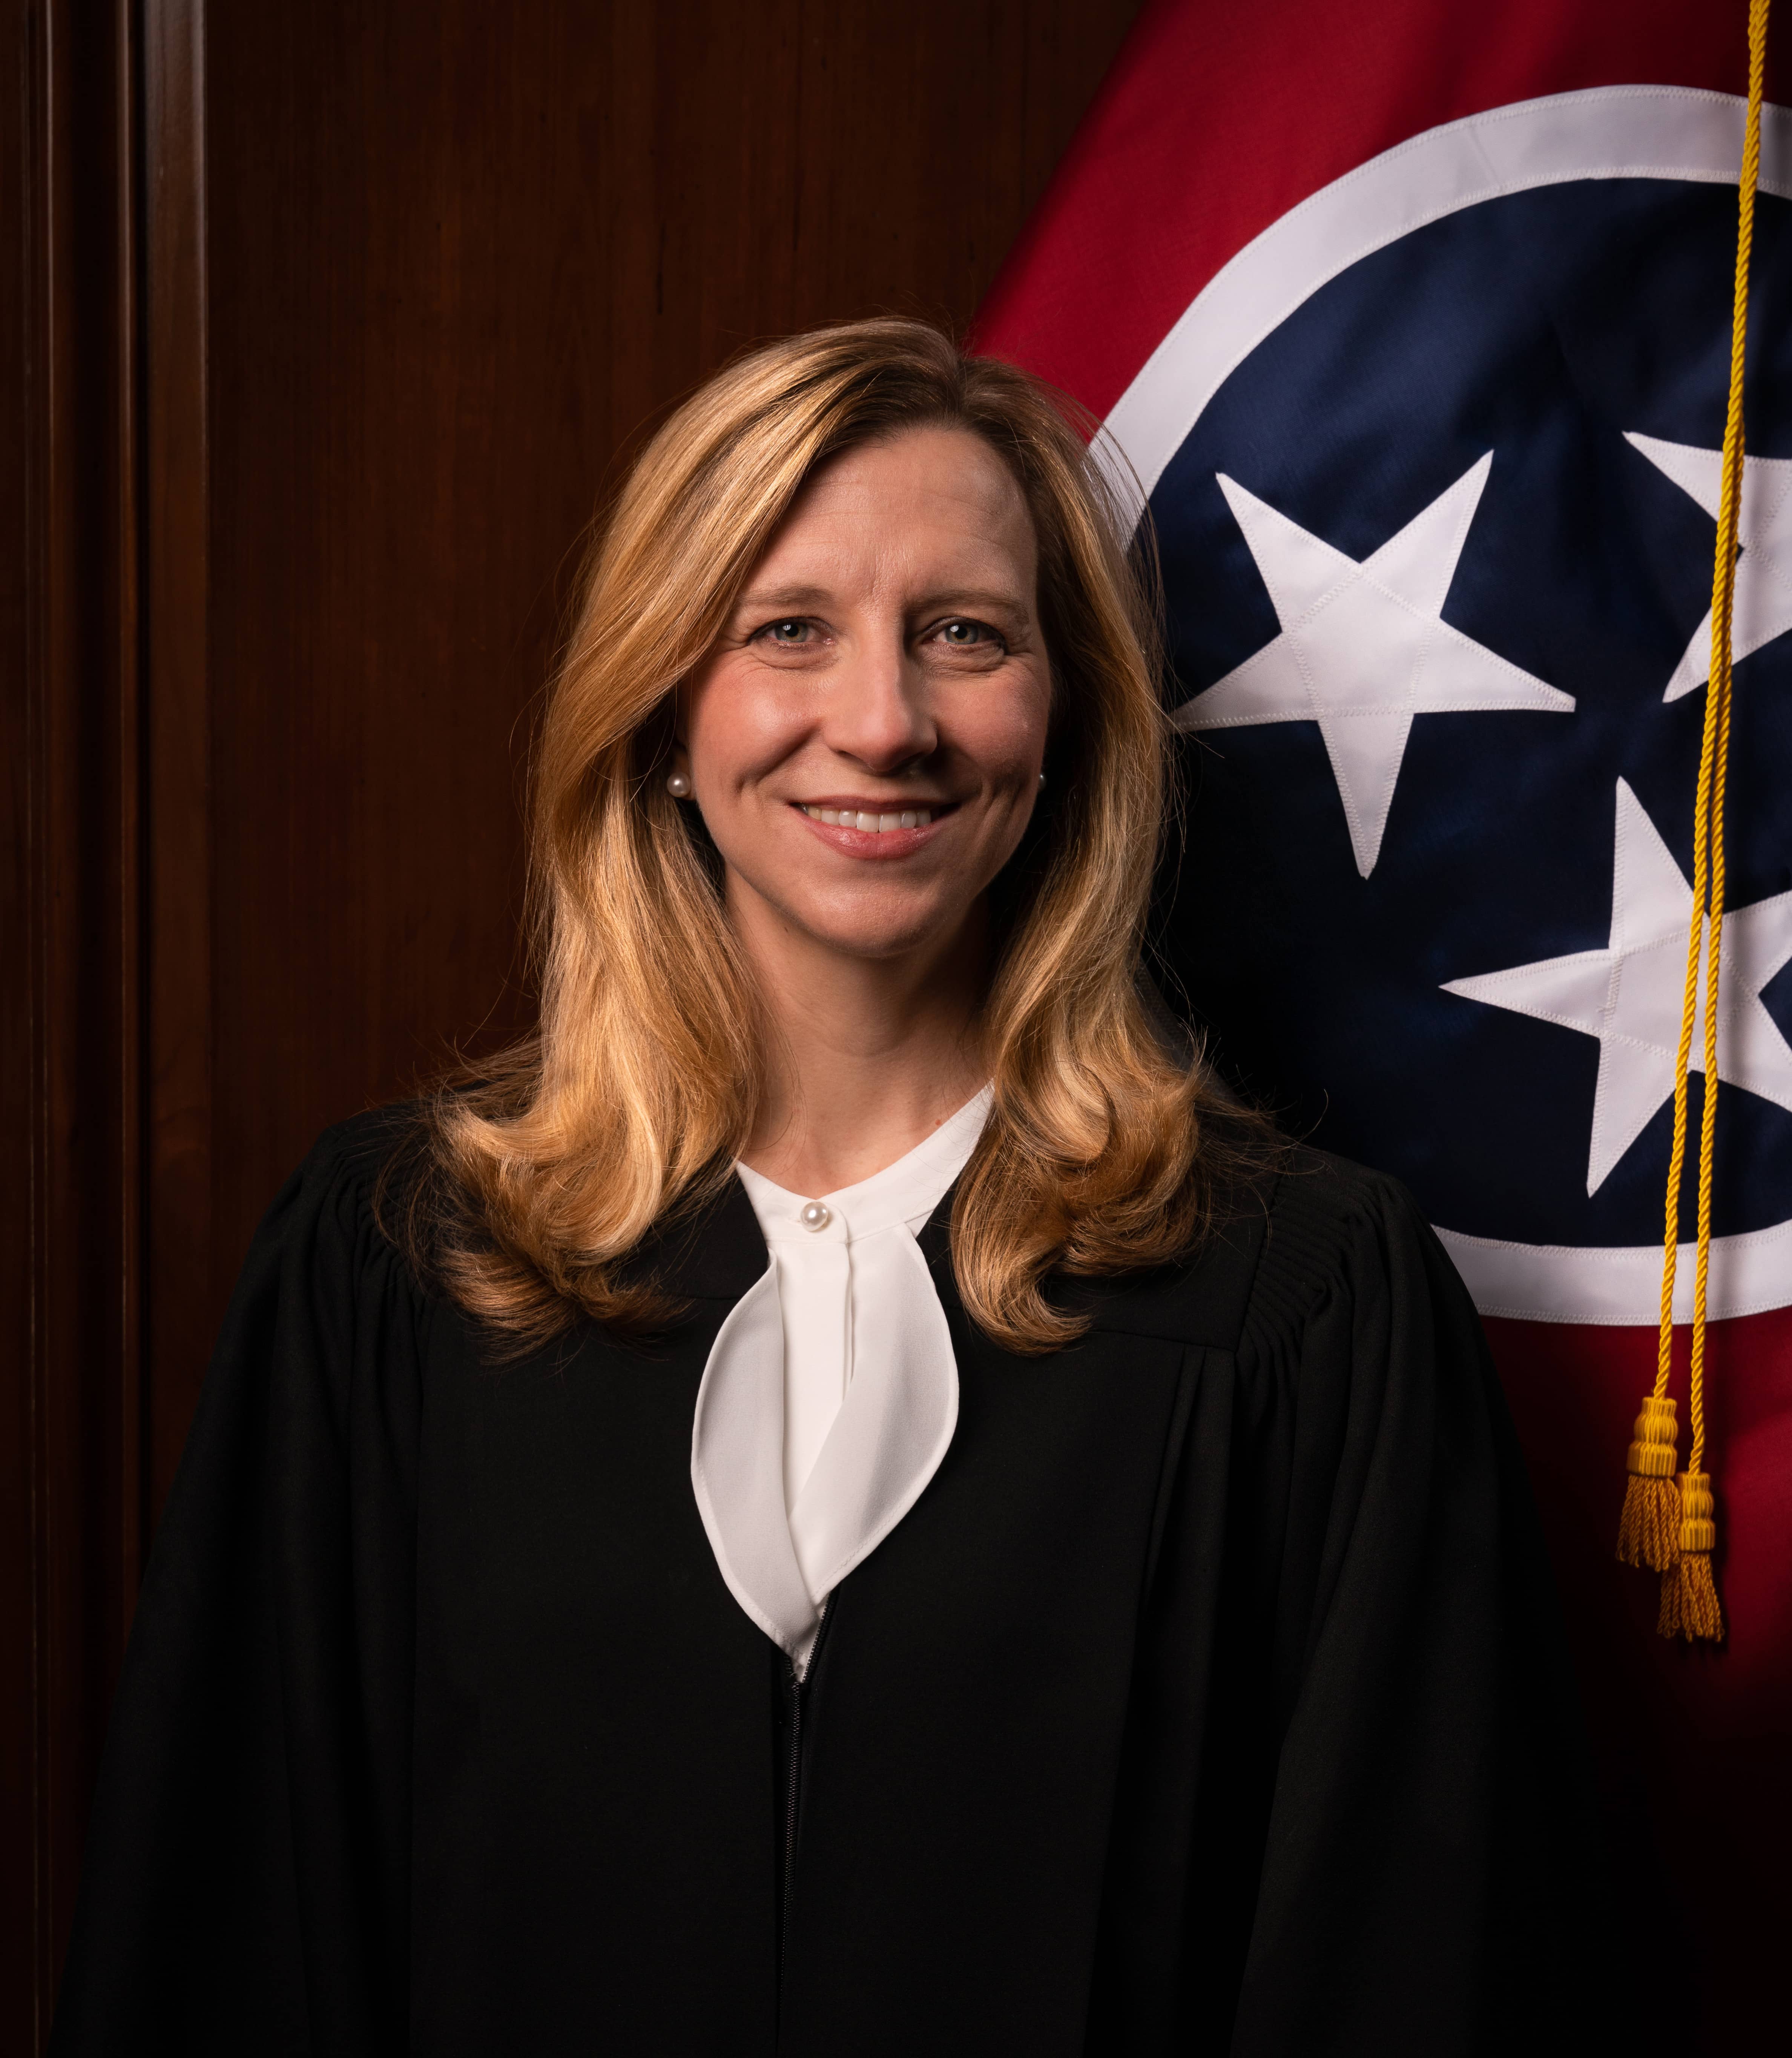 Image of Sarah K. Campbell, TN State Supreme Court Justice, Nonpartisan